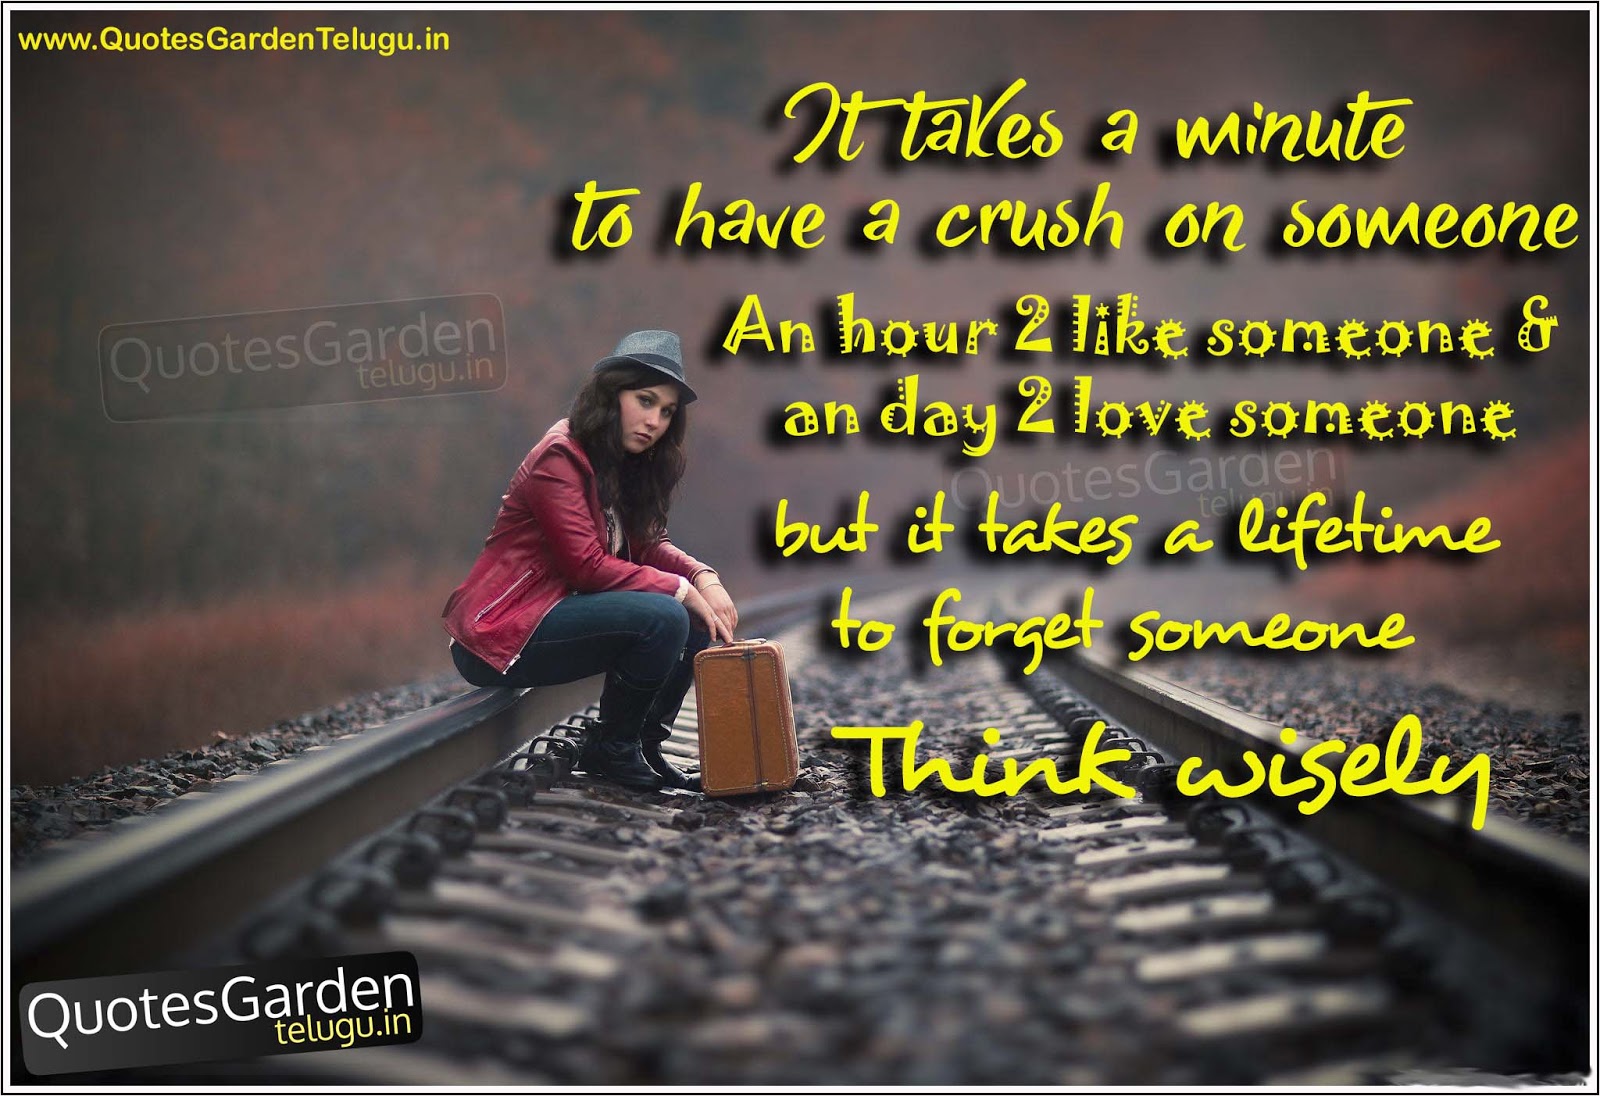 heart touching quotes messages about relations | QUOTES GARDEN TELUGU